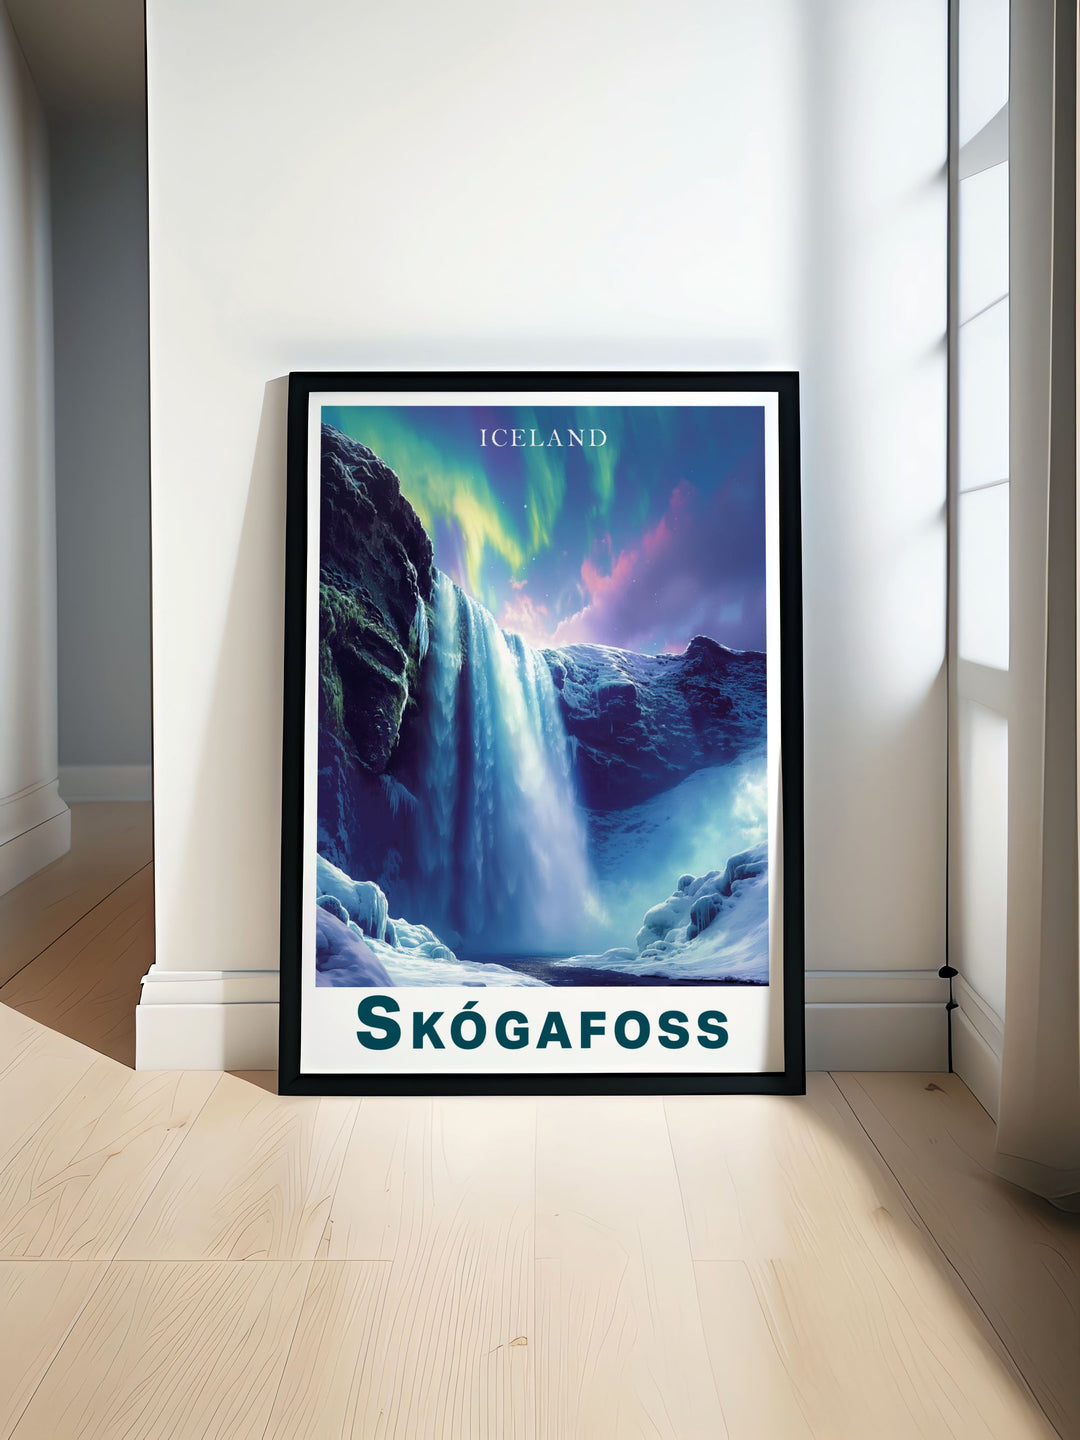 Stunning Skogafoss waterfall northern lights travel poster showcasing the vibrant colors of the aurora borealis over the majestic Icelandic waterfall perfect for adding a touch of Icelands natural beauty to your home decor collection